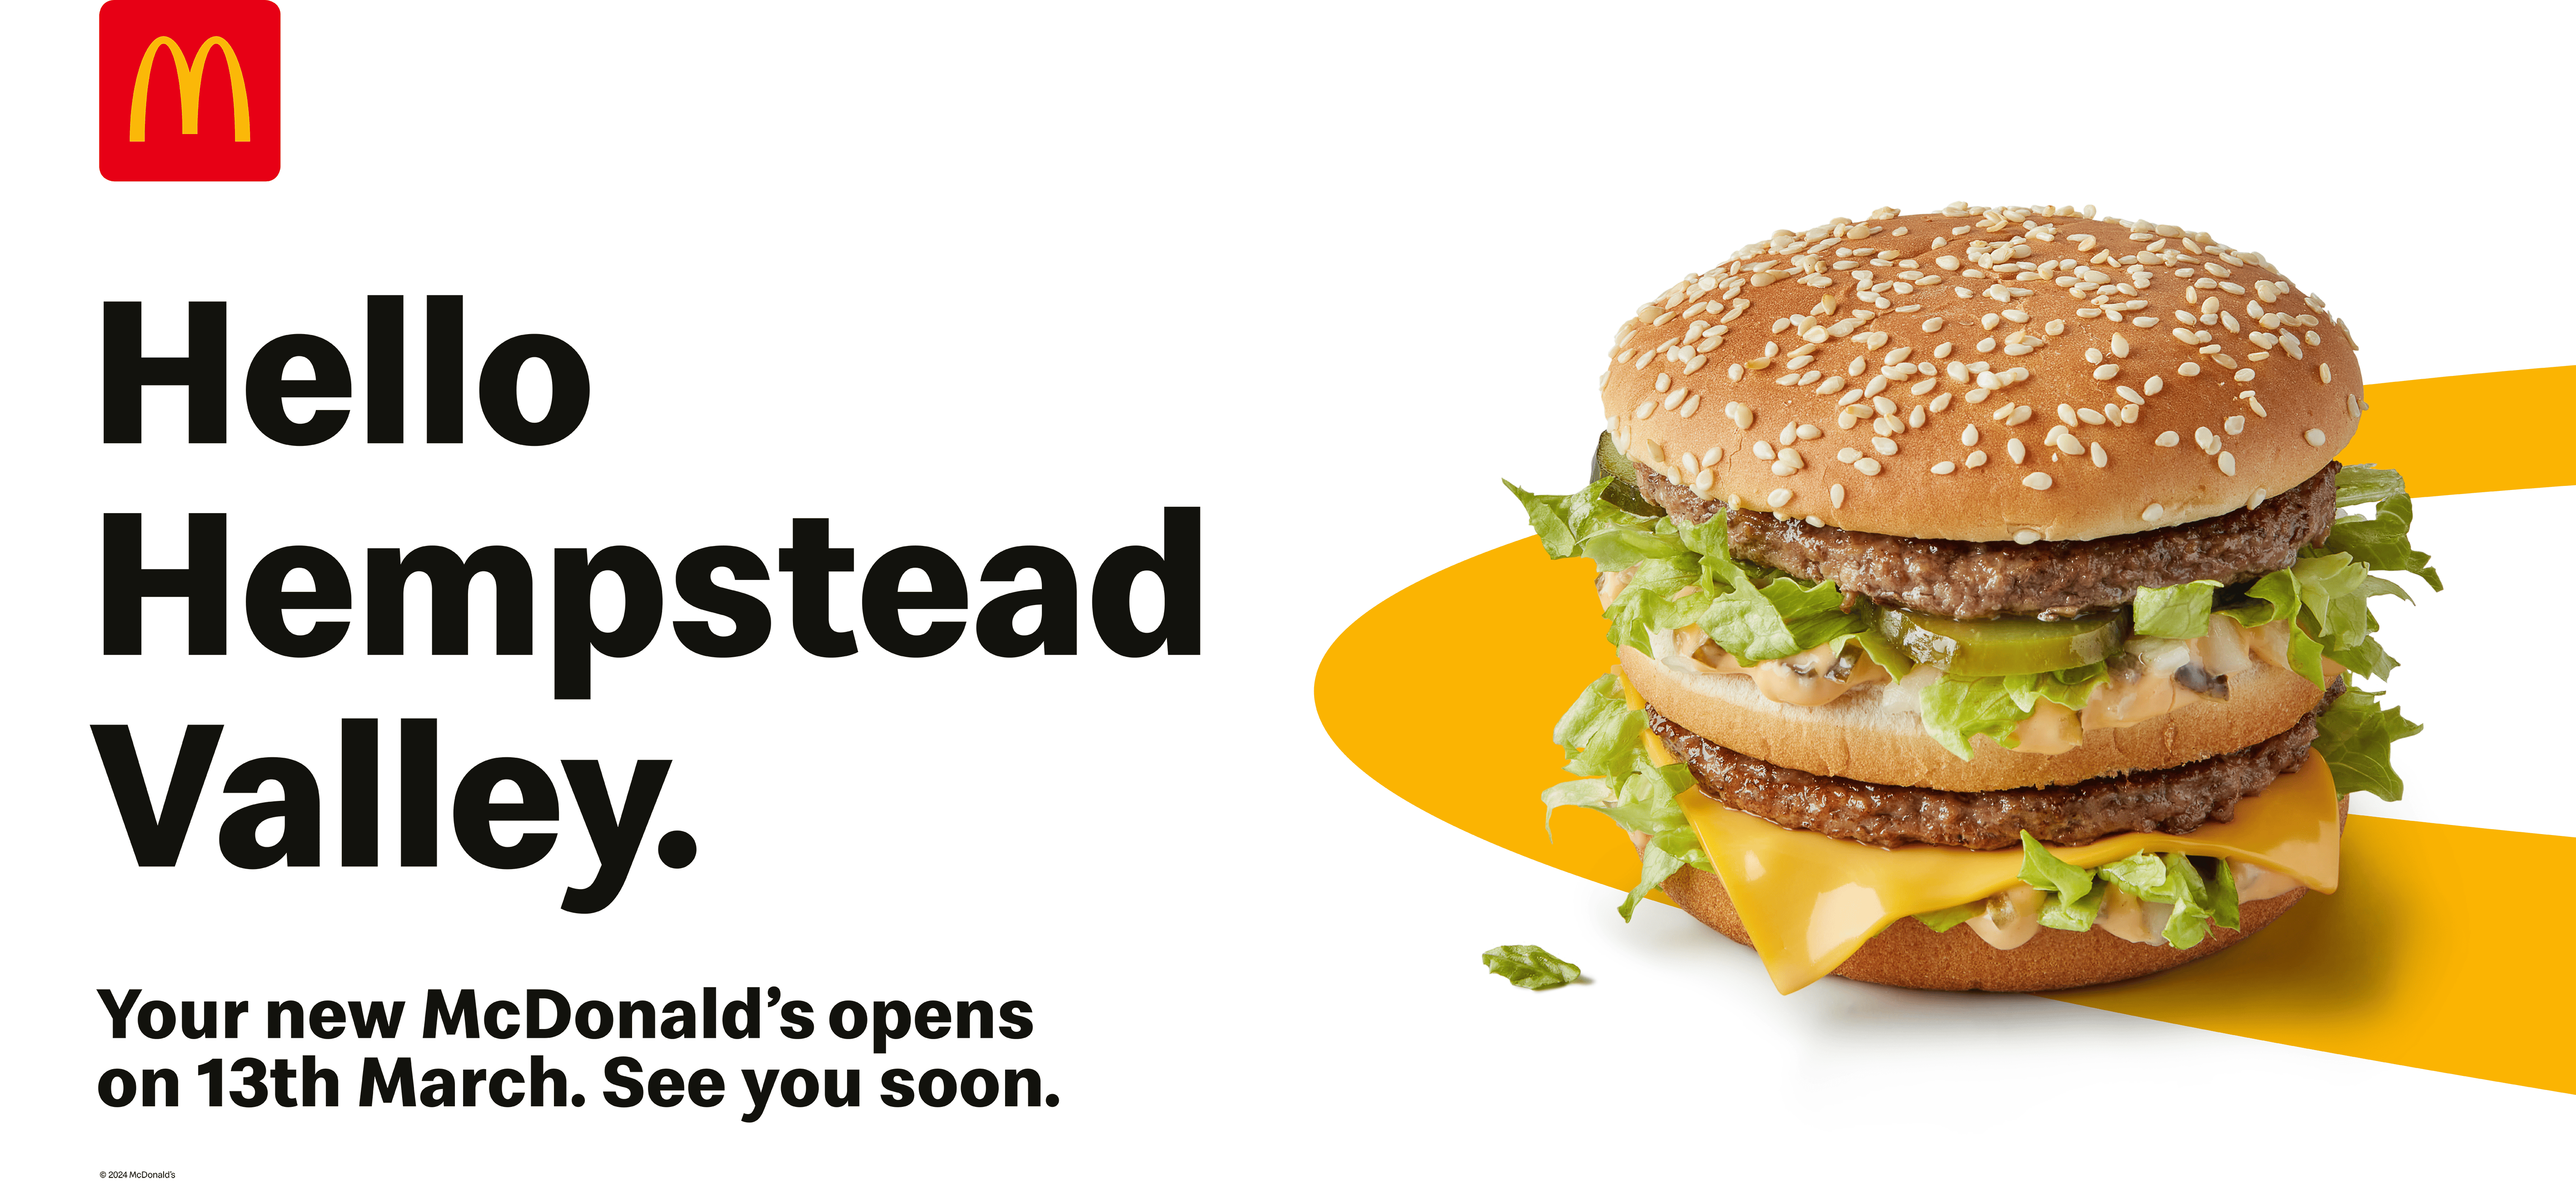 McDonald's Opens 13th March!